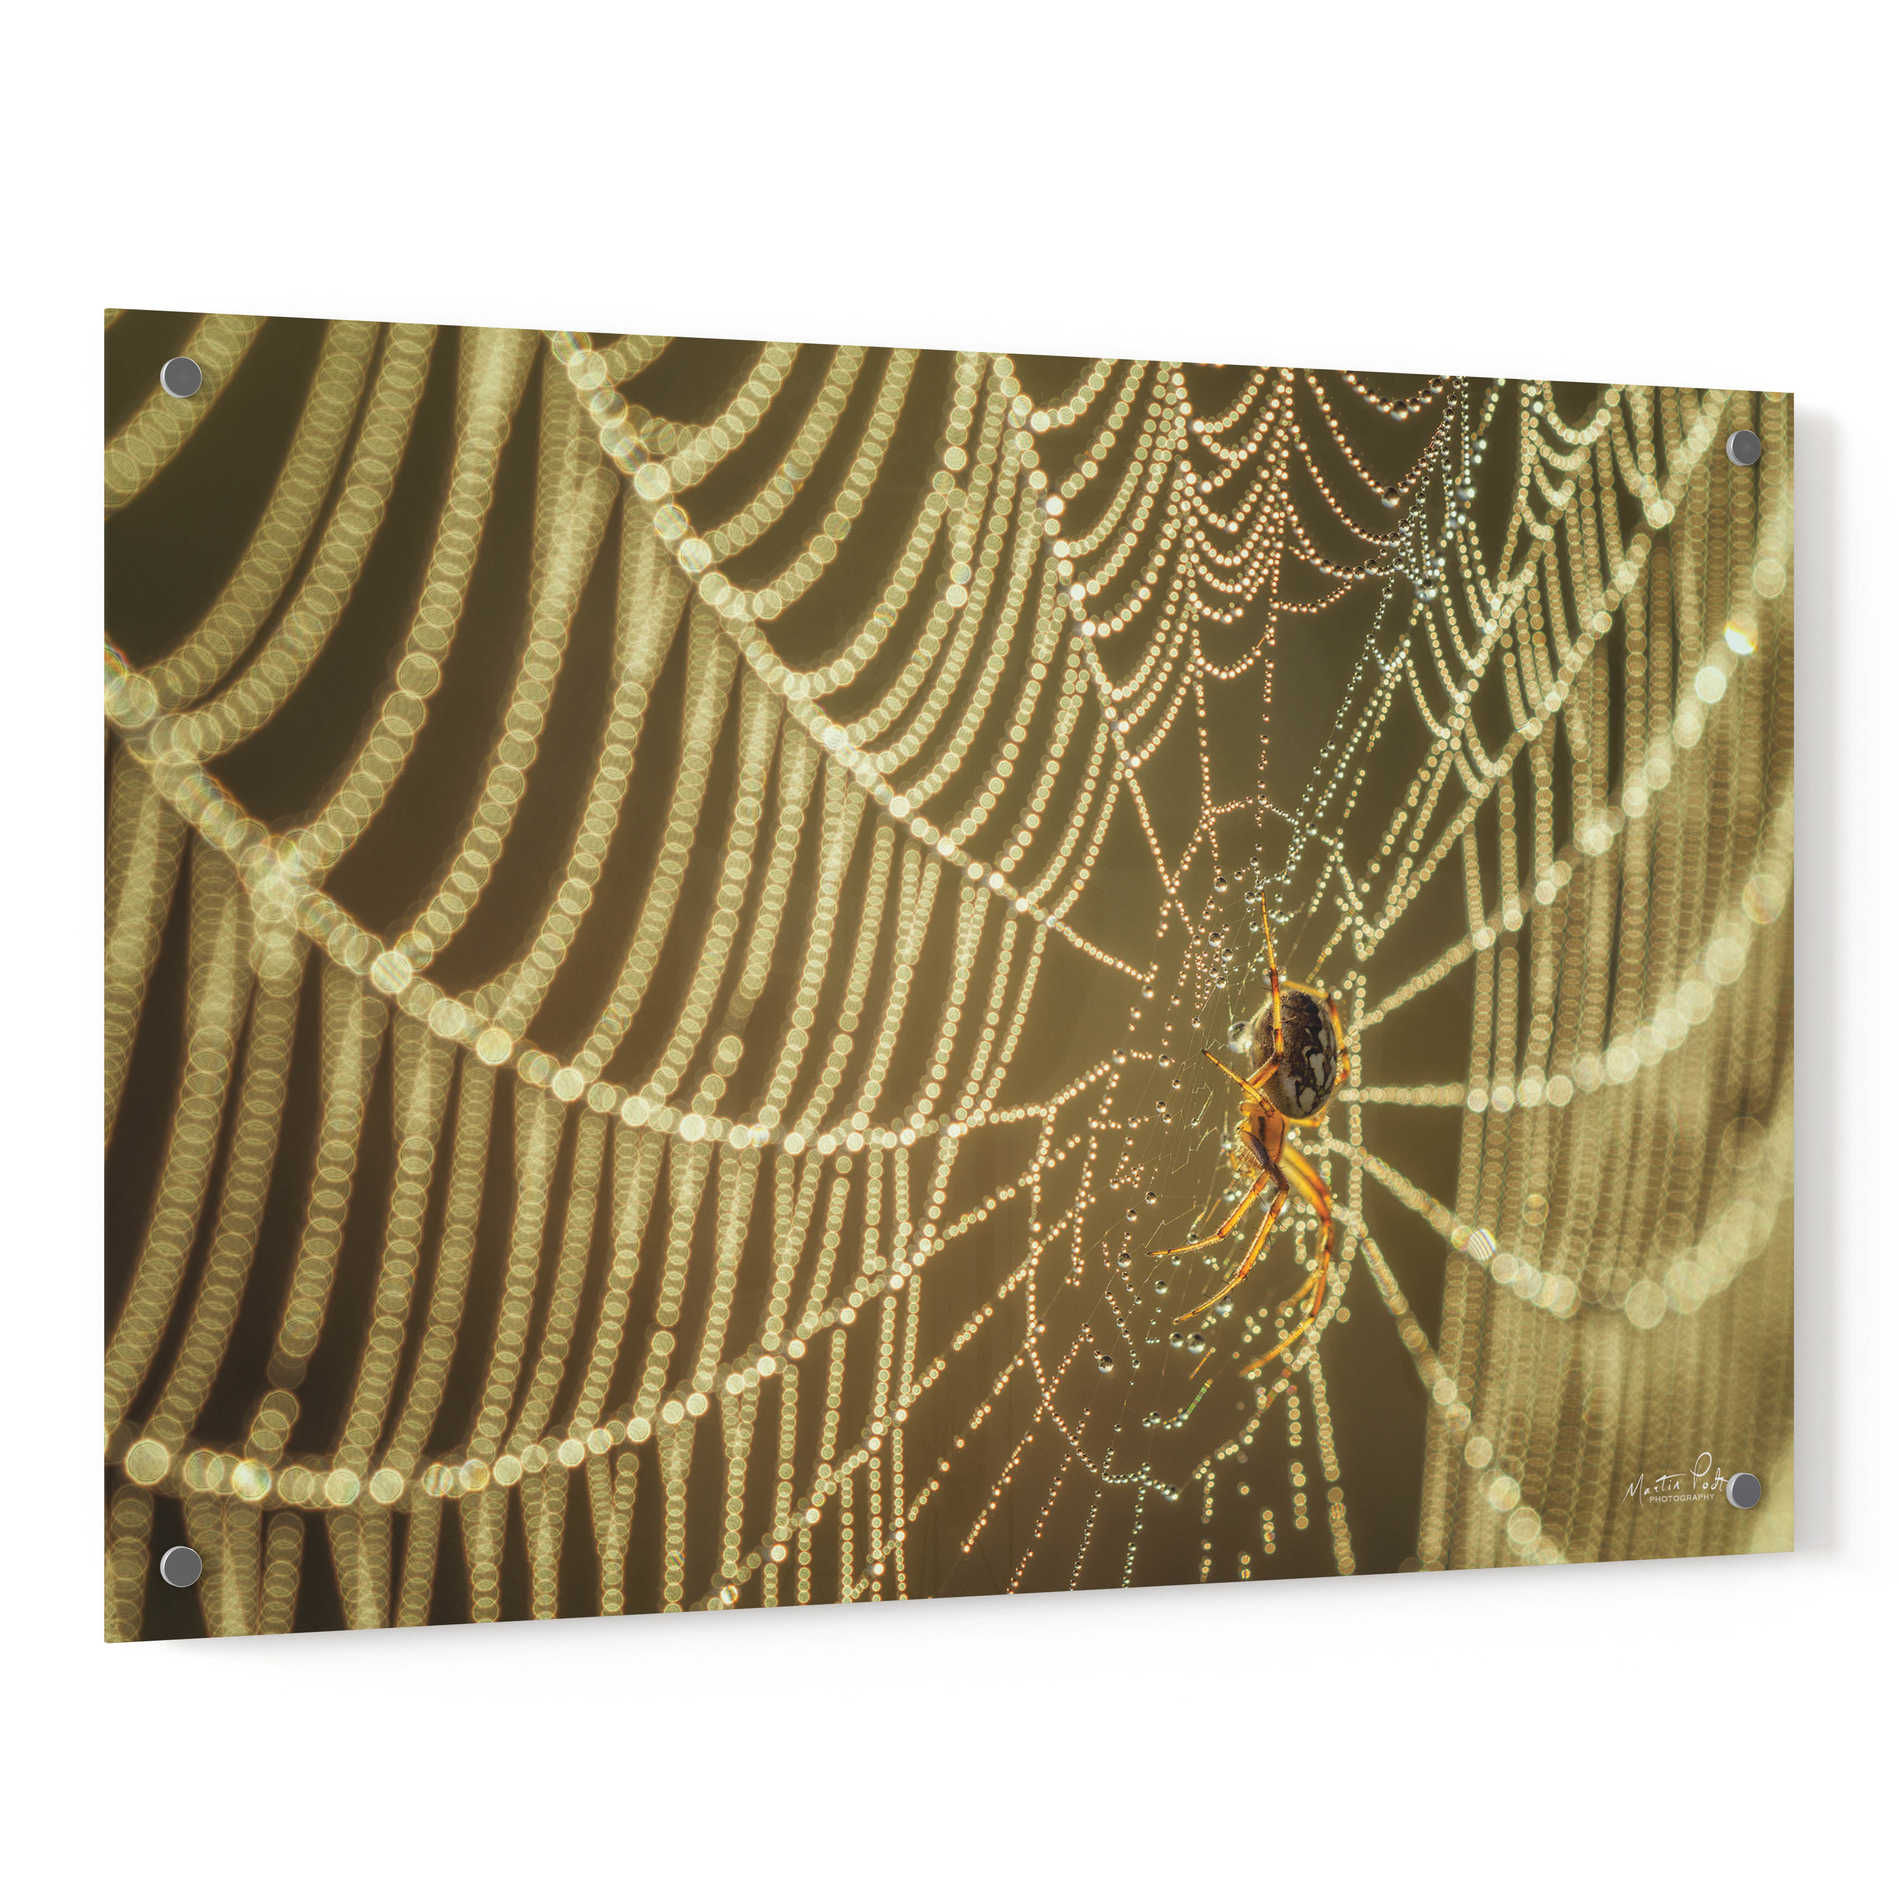 Epic Art 'The Spider and Her Jewels' by Martin Podt, Acrylic Glass Wall Art,36x24